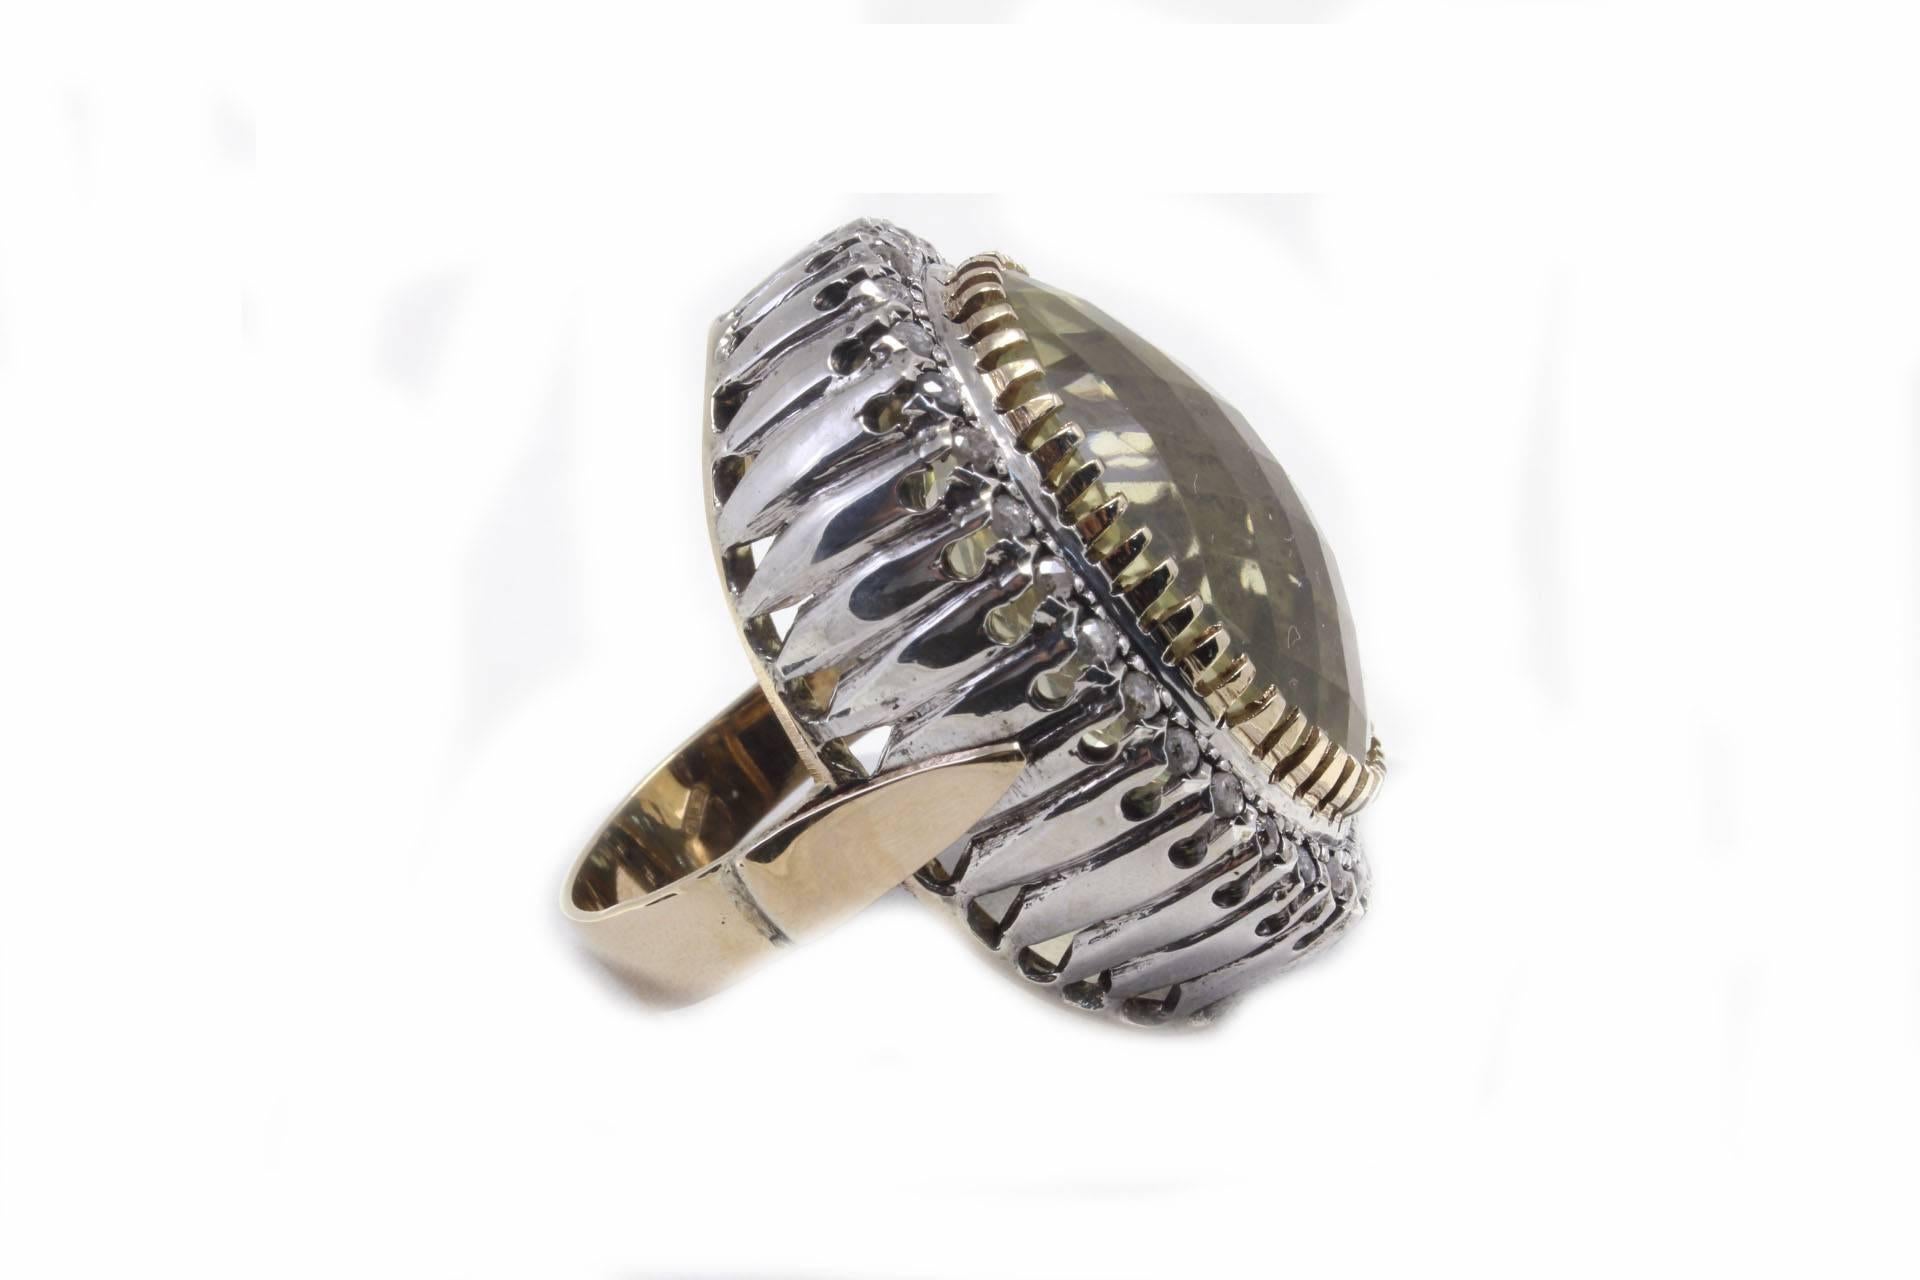 Shiny ring in 9kt  rose gold and silver composed of a central light lemon citrine surrounded by a diamonds oval stripe.
Ring Size: ITA 16 - French 56 - US 7.5 - UK P
Tot Weight 18.1 g
Diamonds 1.23 Kt
Citrin 31.00 Kt

Rf. geri